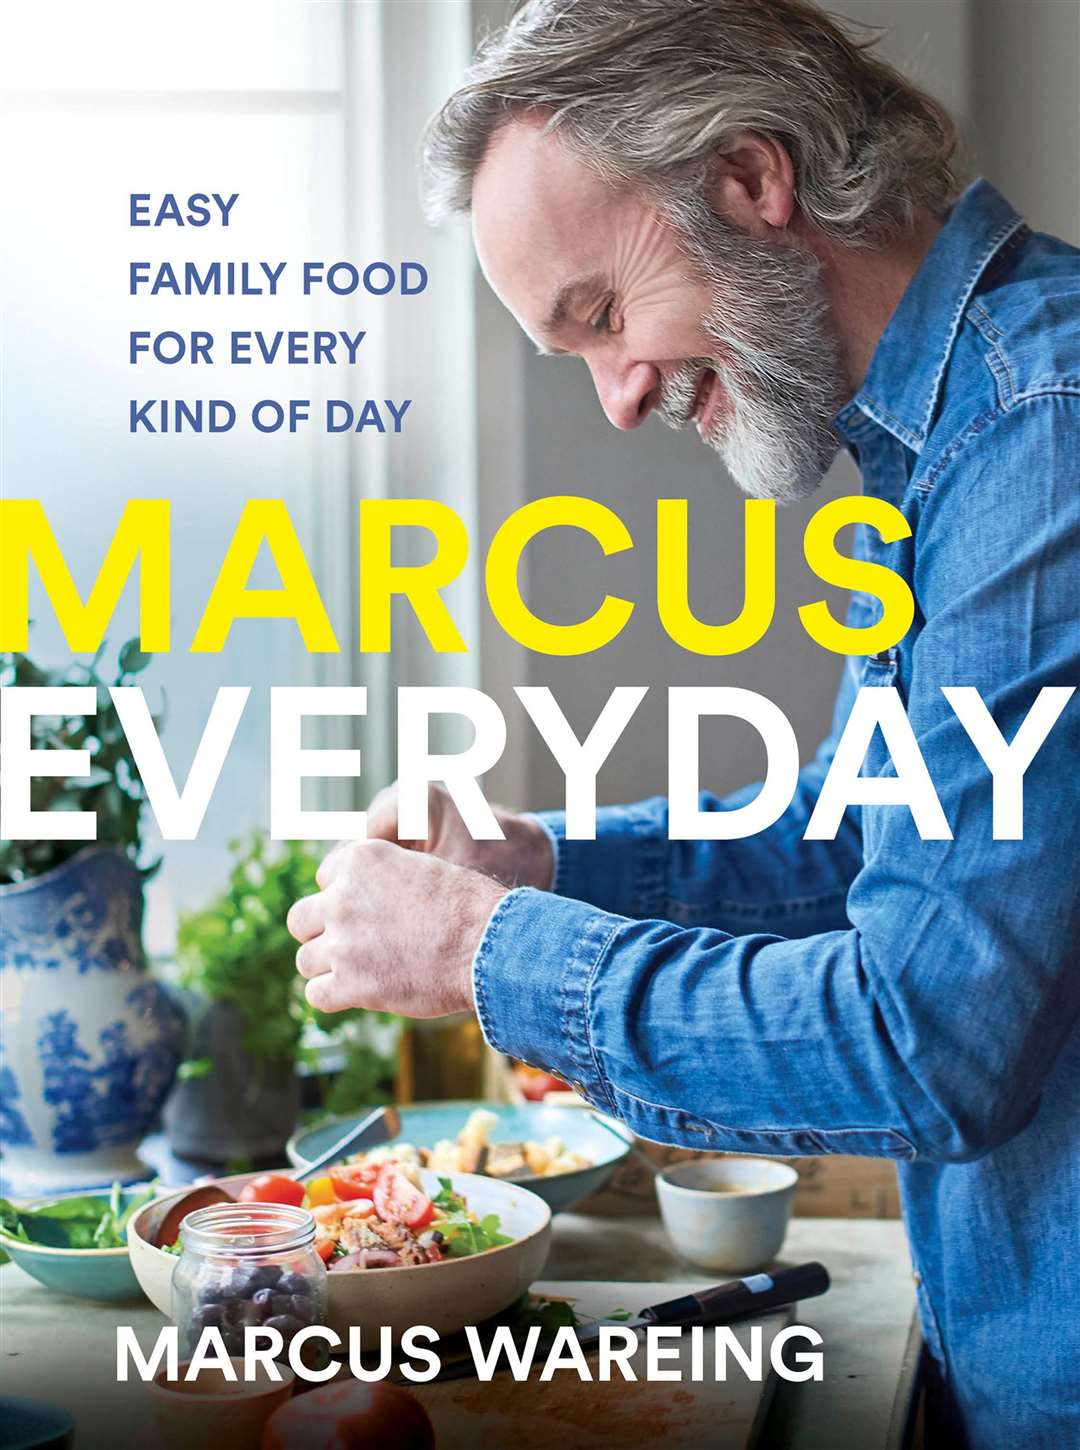 Marcus Everyday by Marcus Wareing is published by HarperCollins, priced £20. Available now.